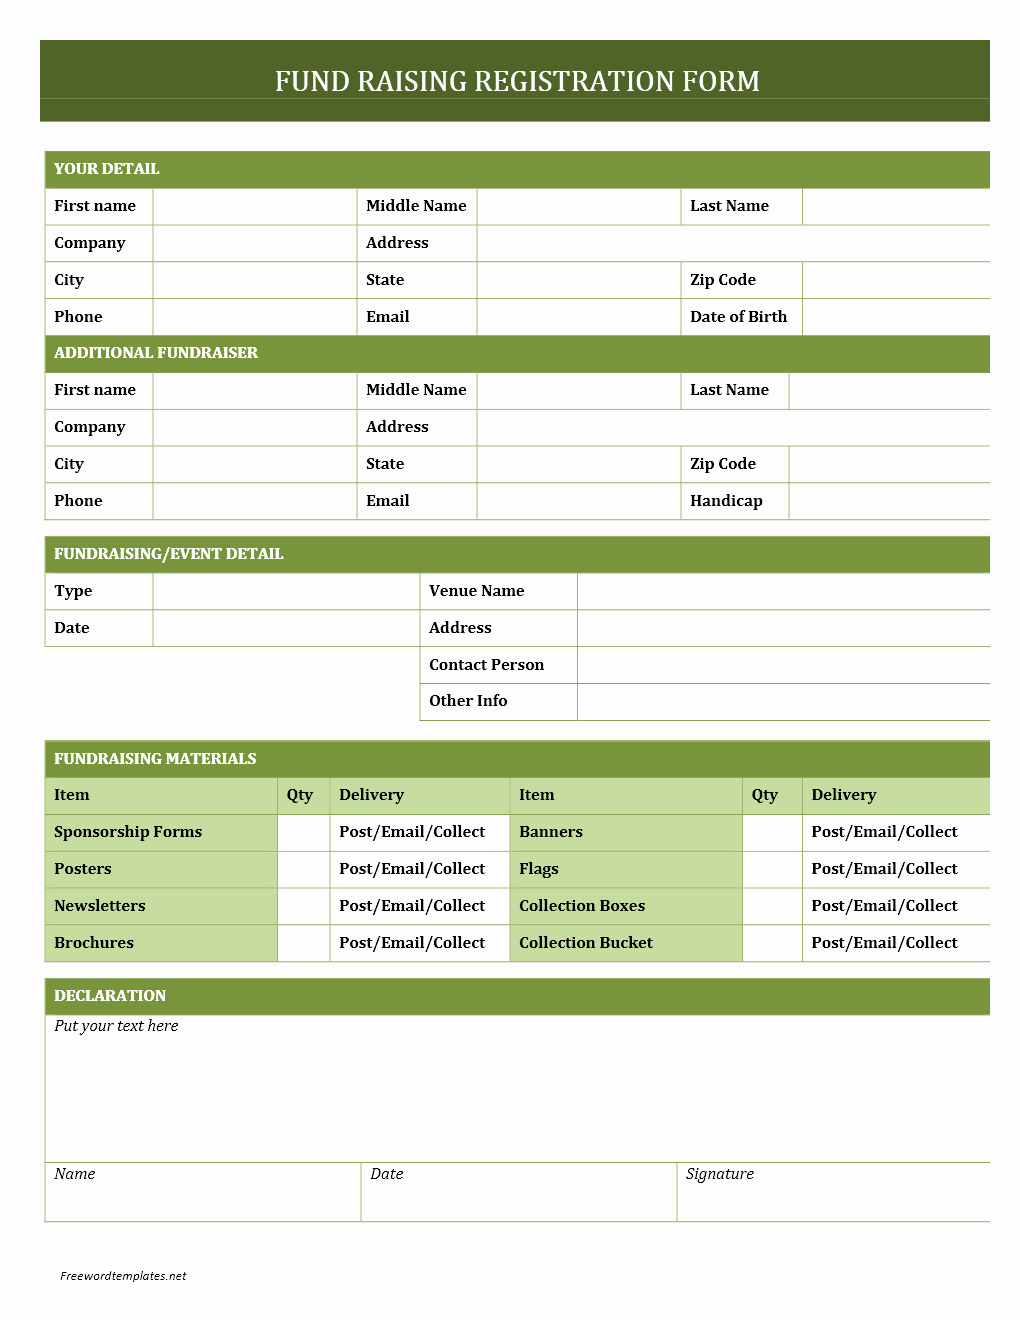 Fundraiser form Template Free Awesome Fundraising Registration form